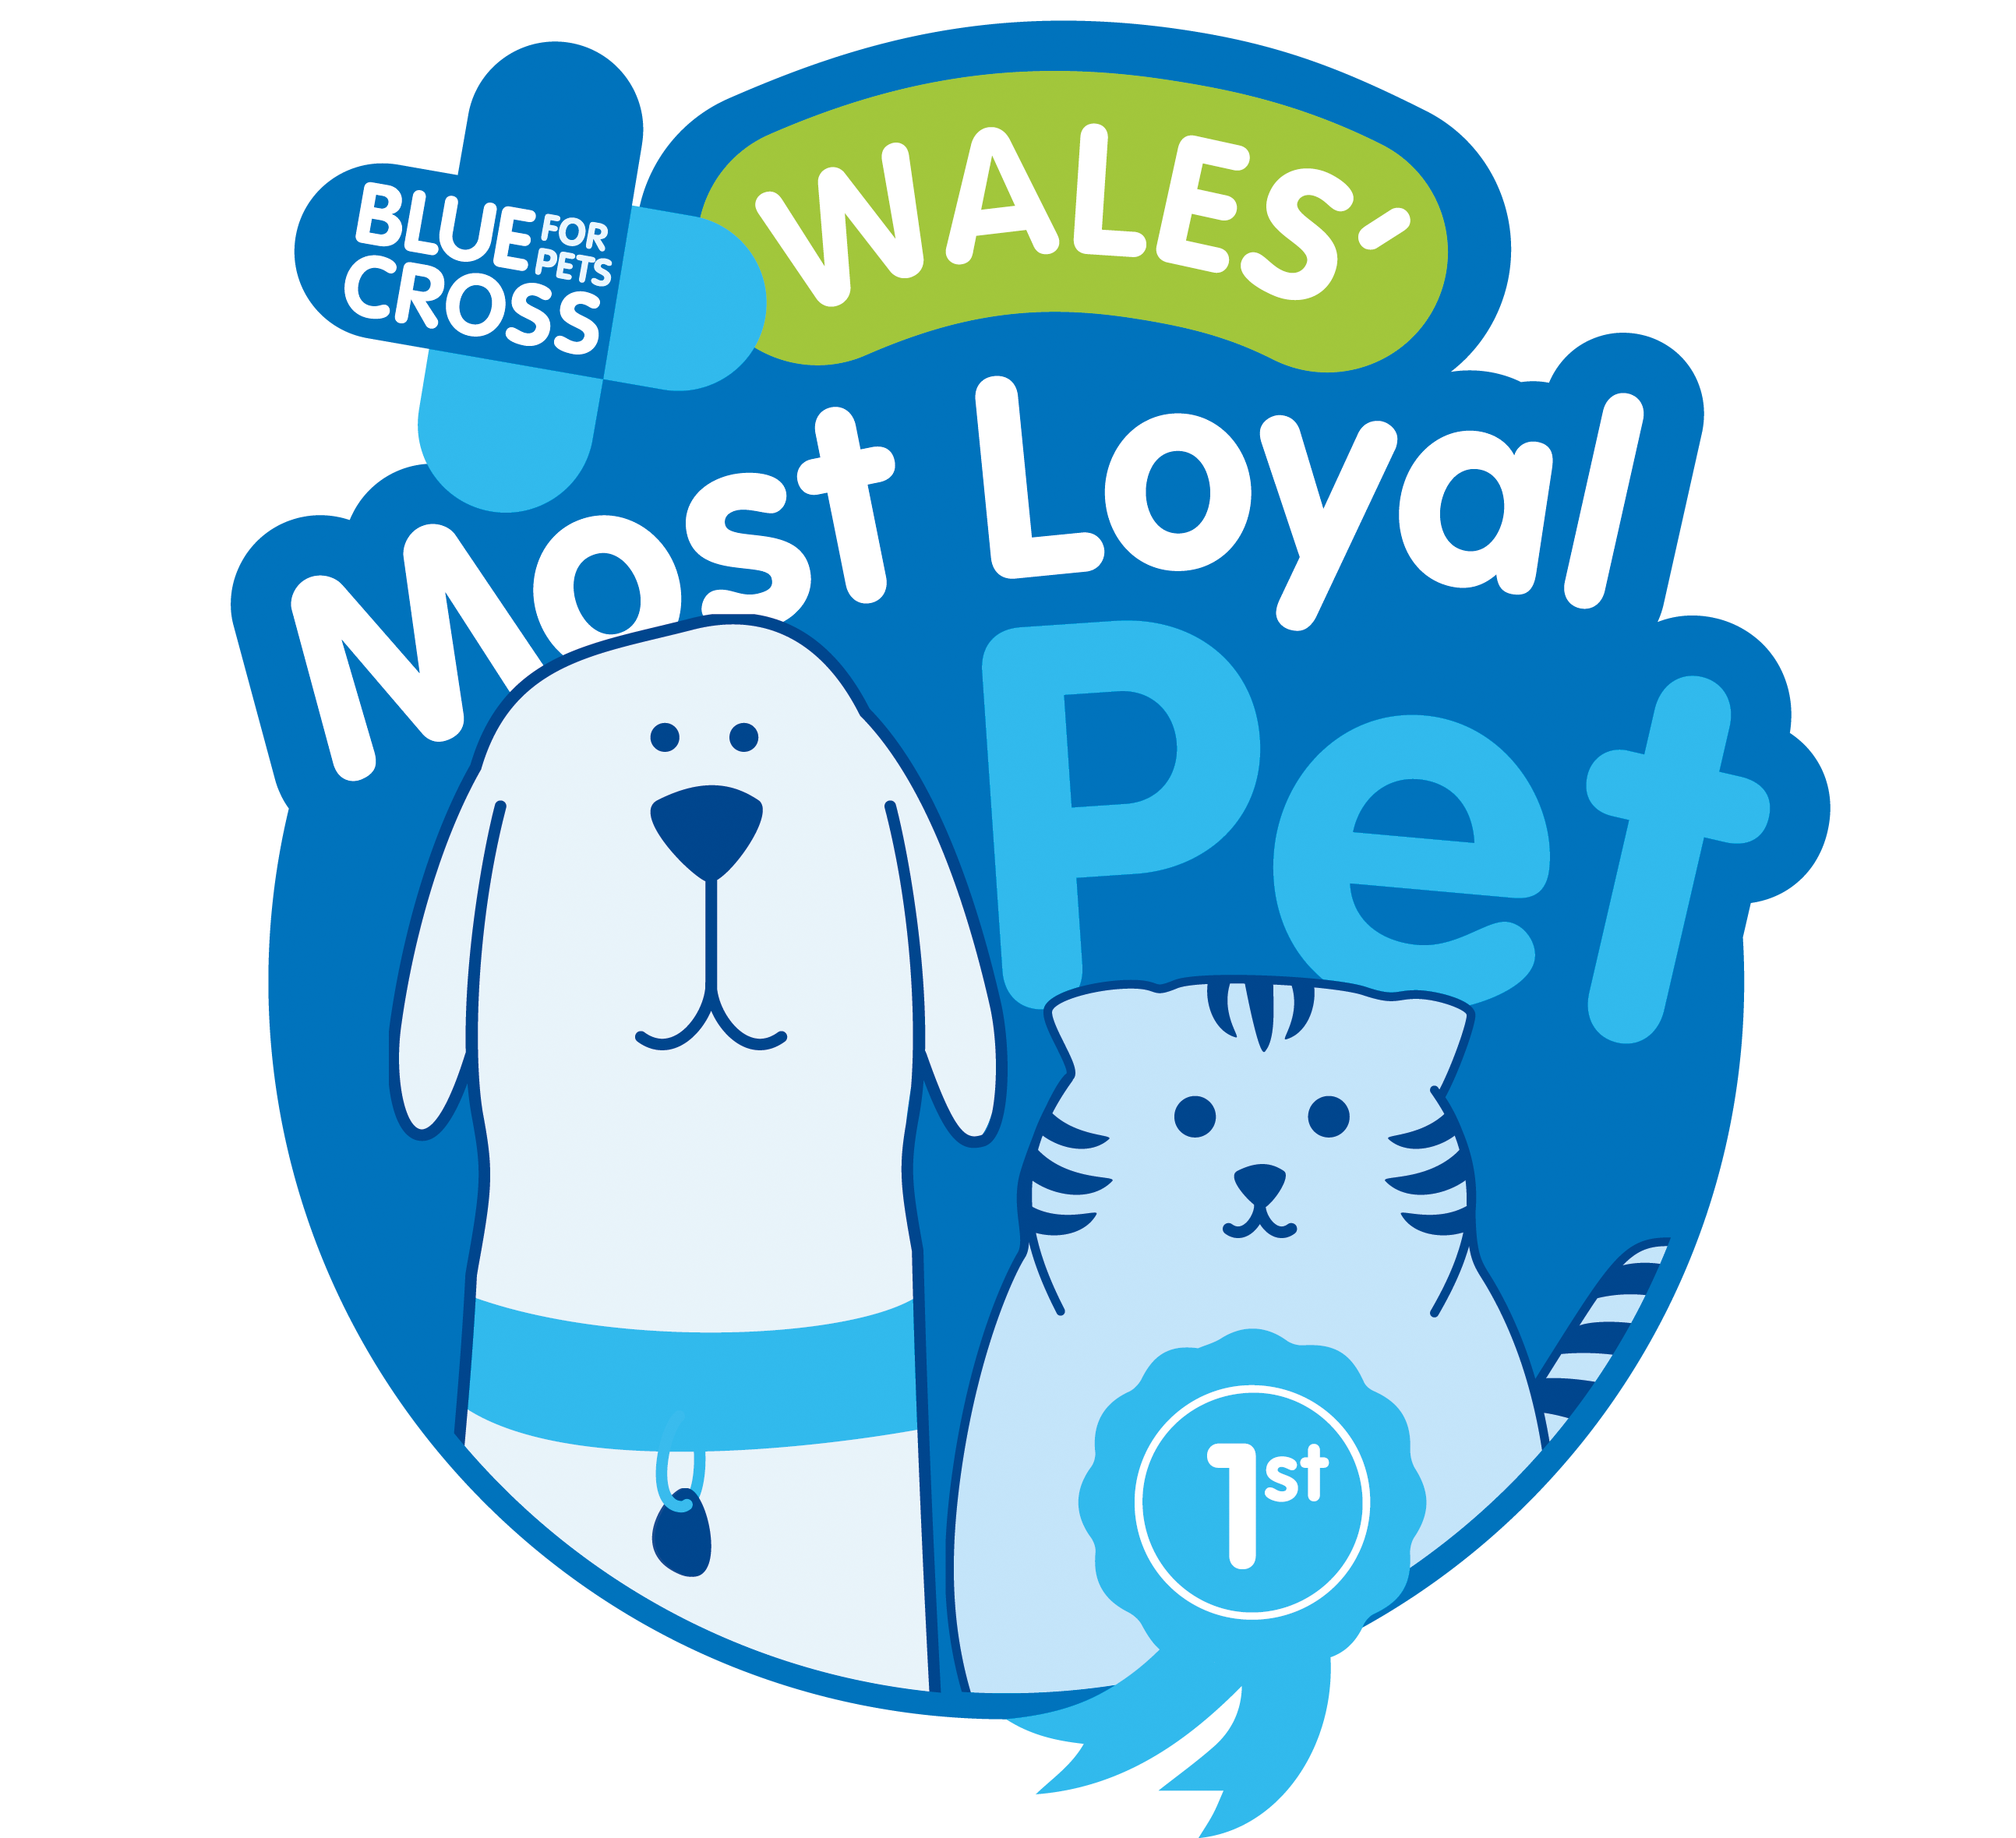 An illustration of a dog and cat with text 'Wales' Most Loyal Pet'